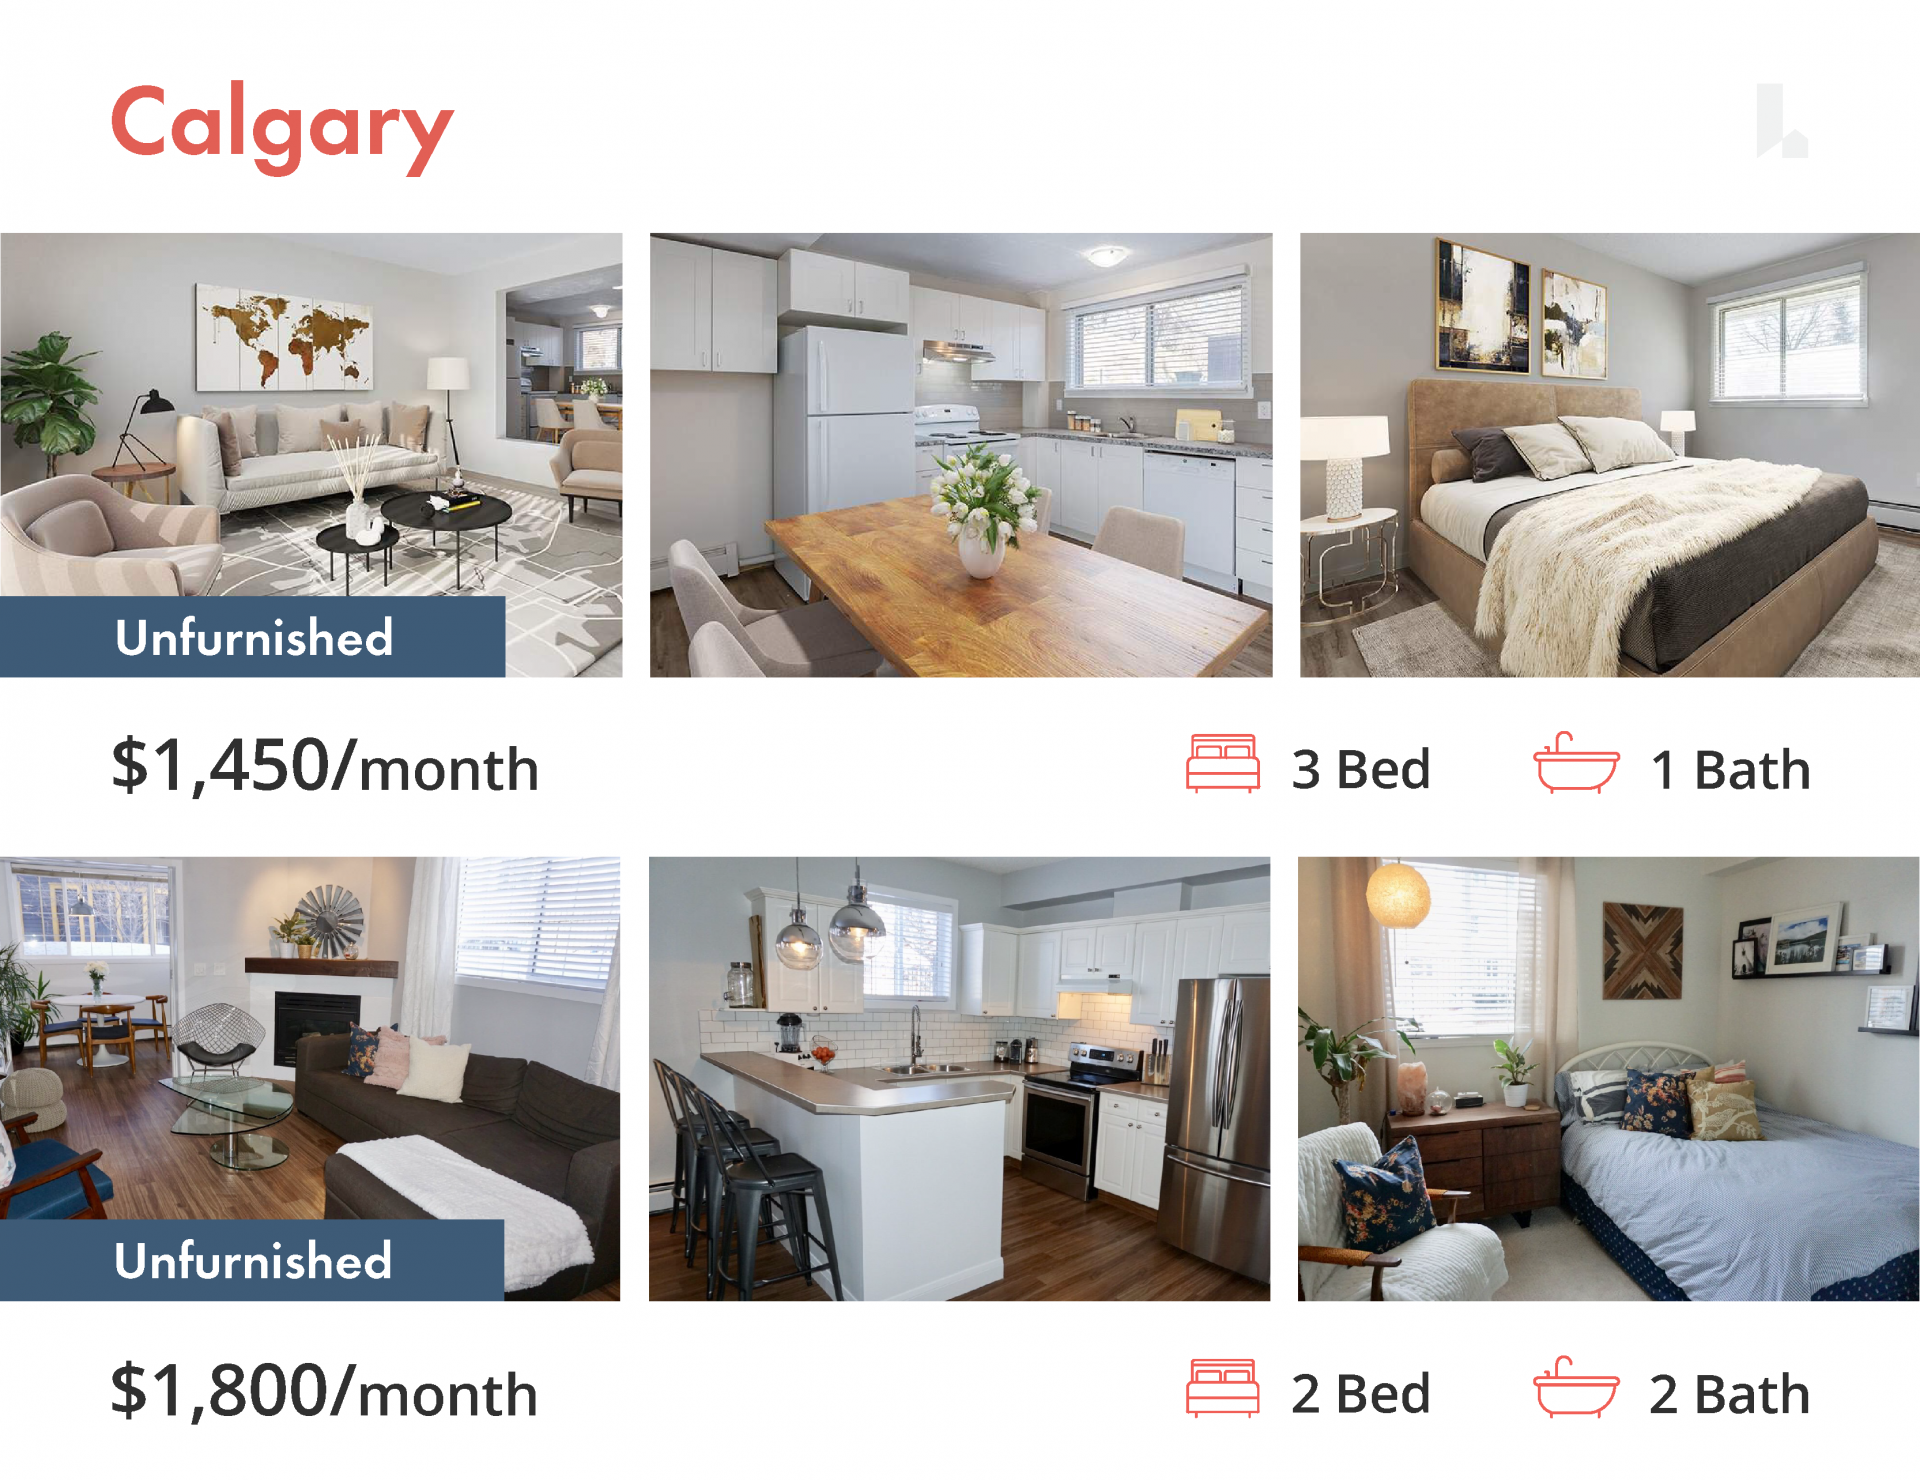 Calgary Apartment Rentals For $1800 Or Less